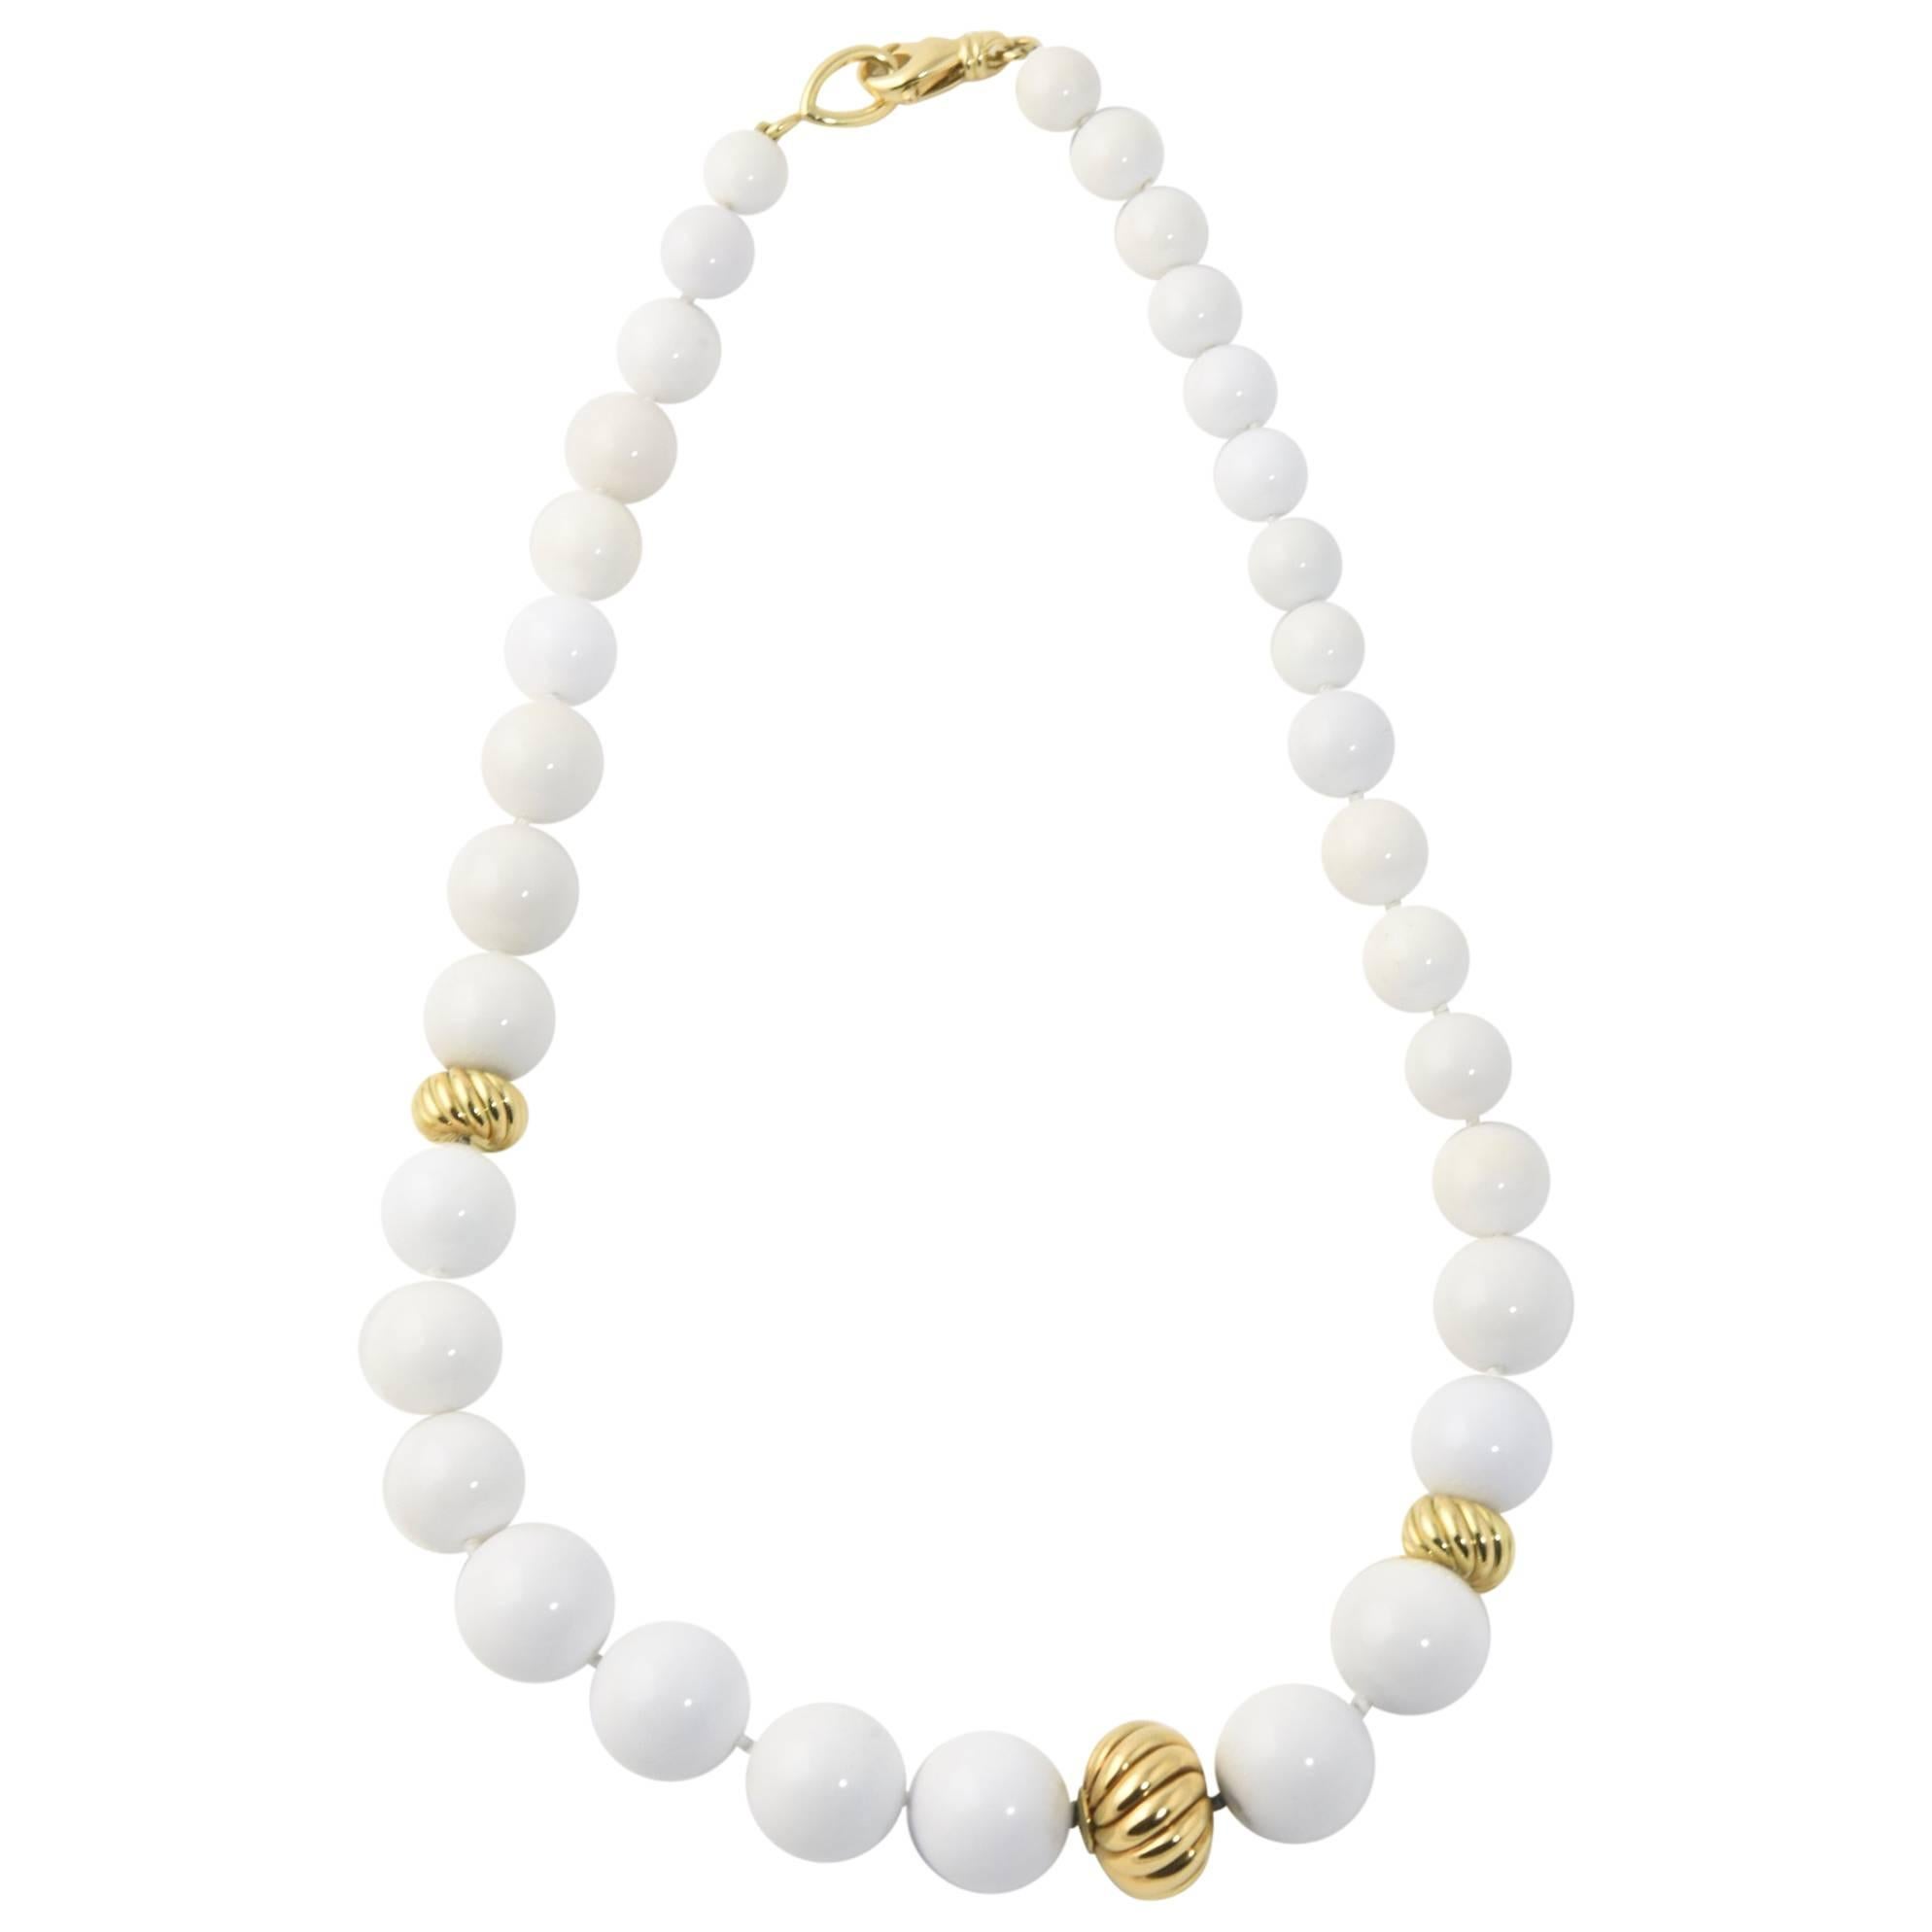 David Yurman White Agate and Sculpted Gold Bead Necklace